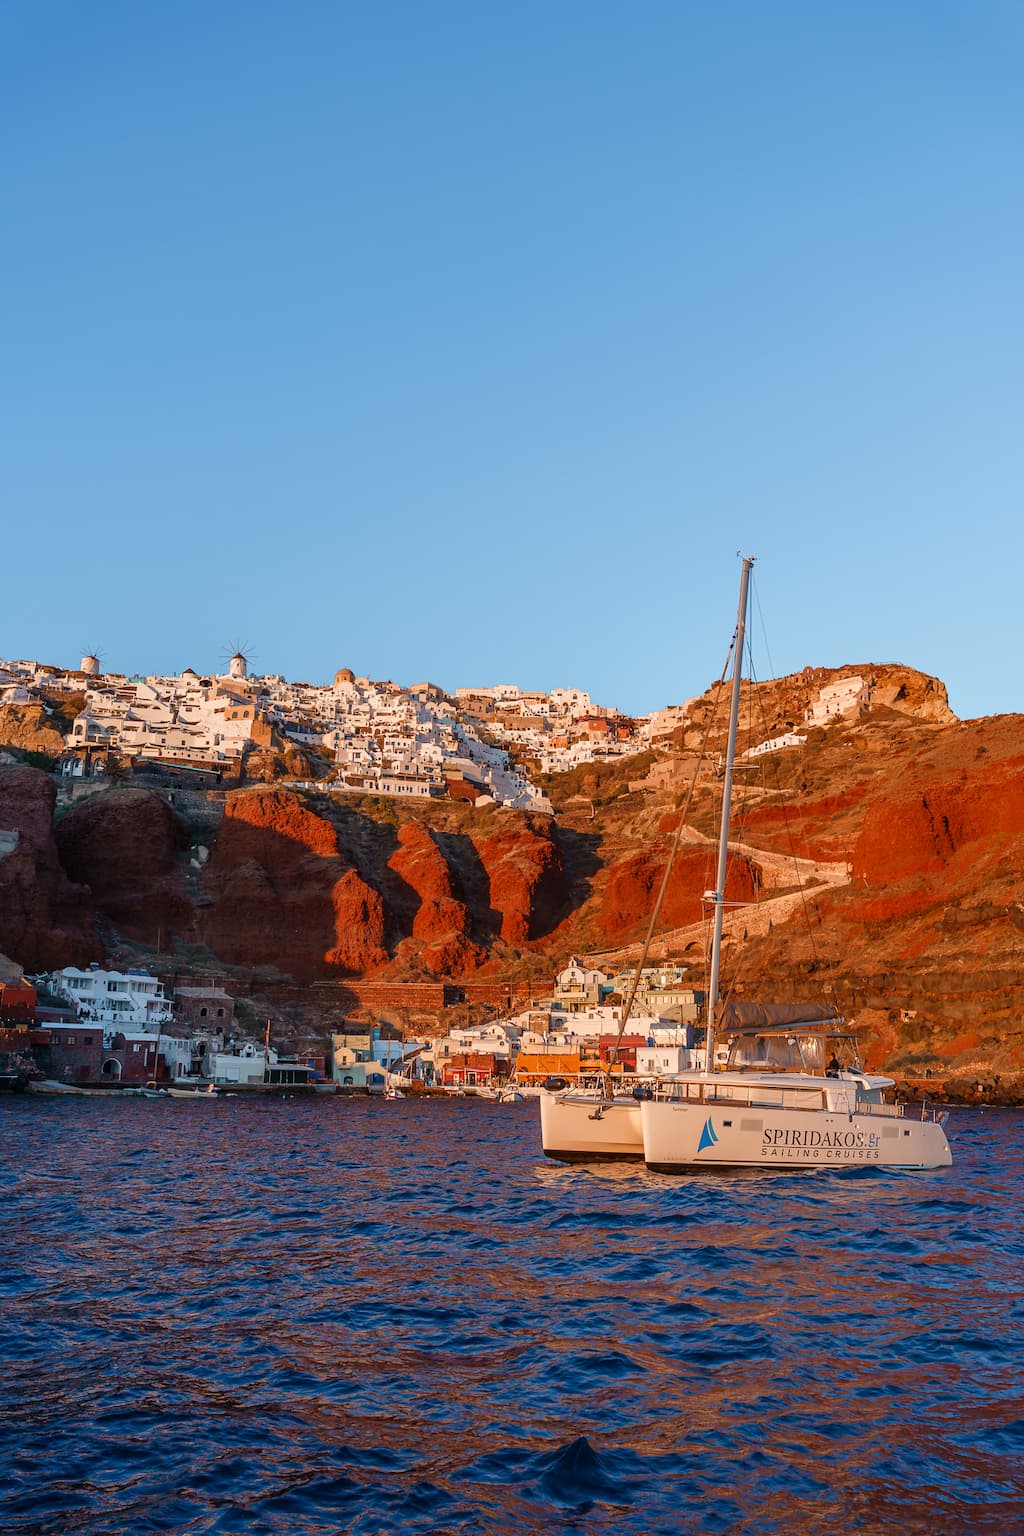 Best volcano tours Santorini end in Amoudi Bay to watch the famed Santorini sunset.